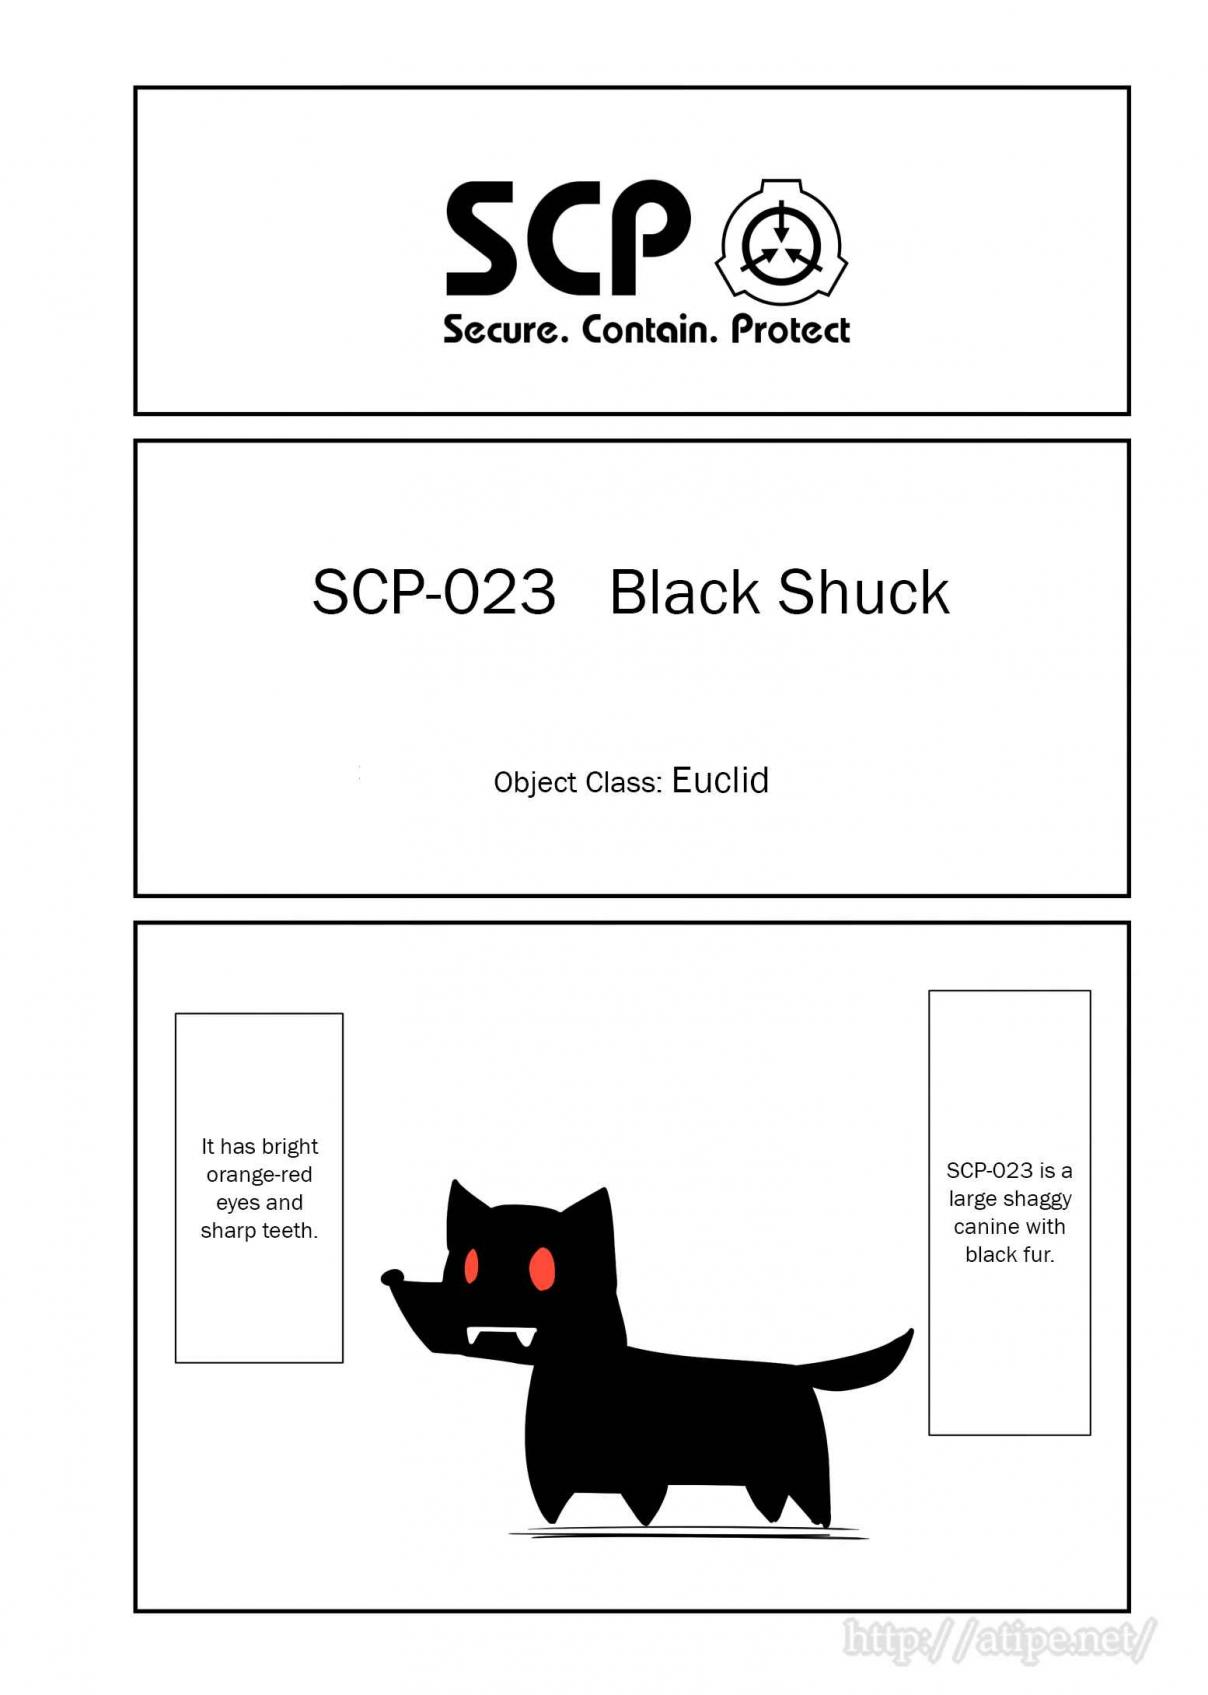 Oversimplified SCP Ch. 60 SCP 023